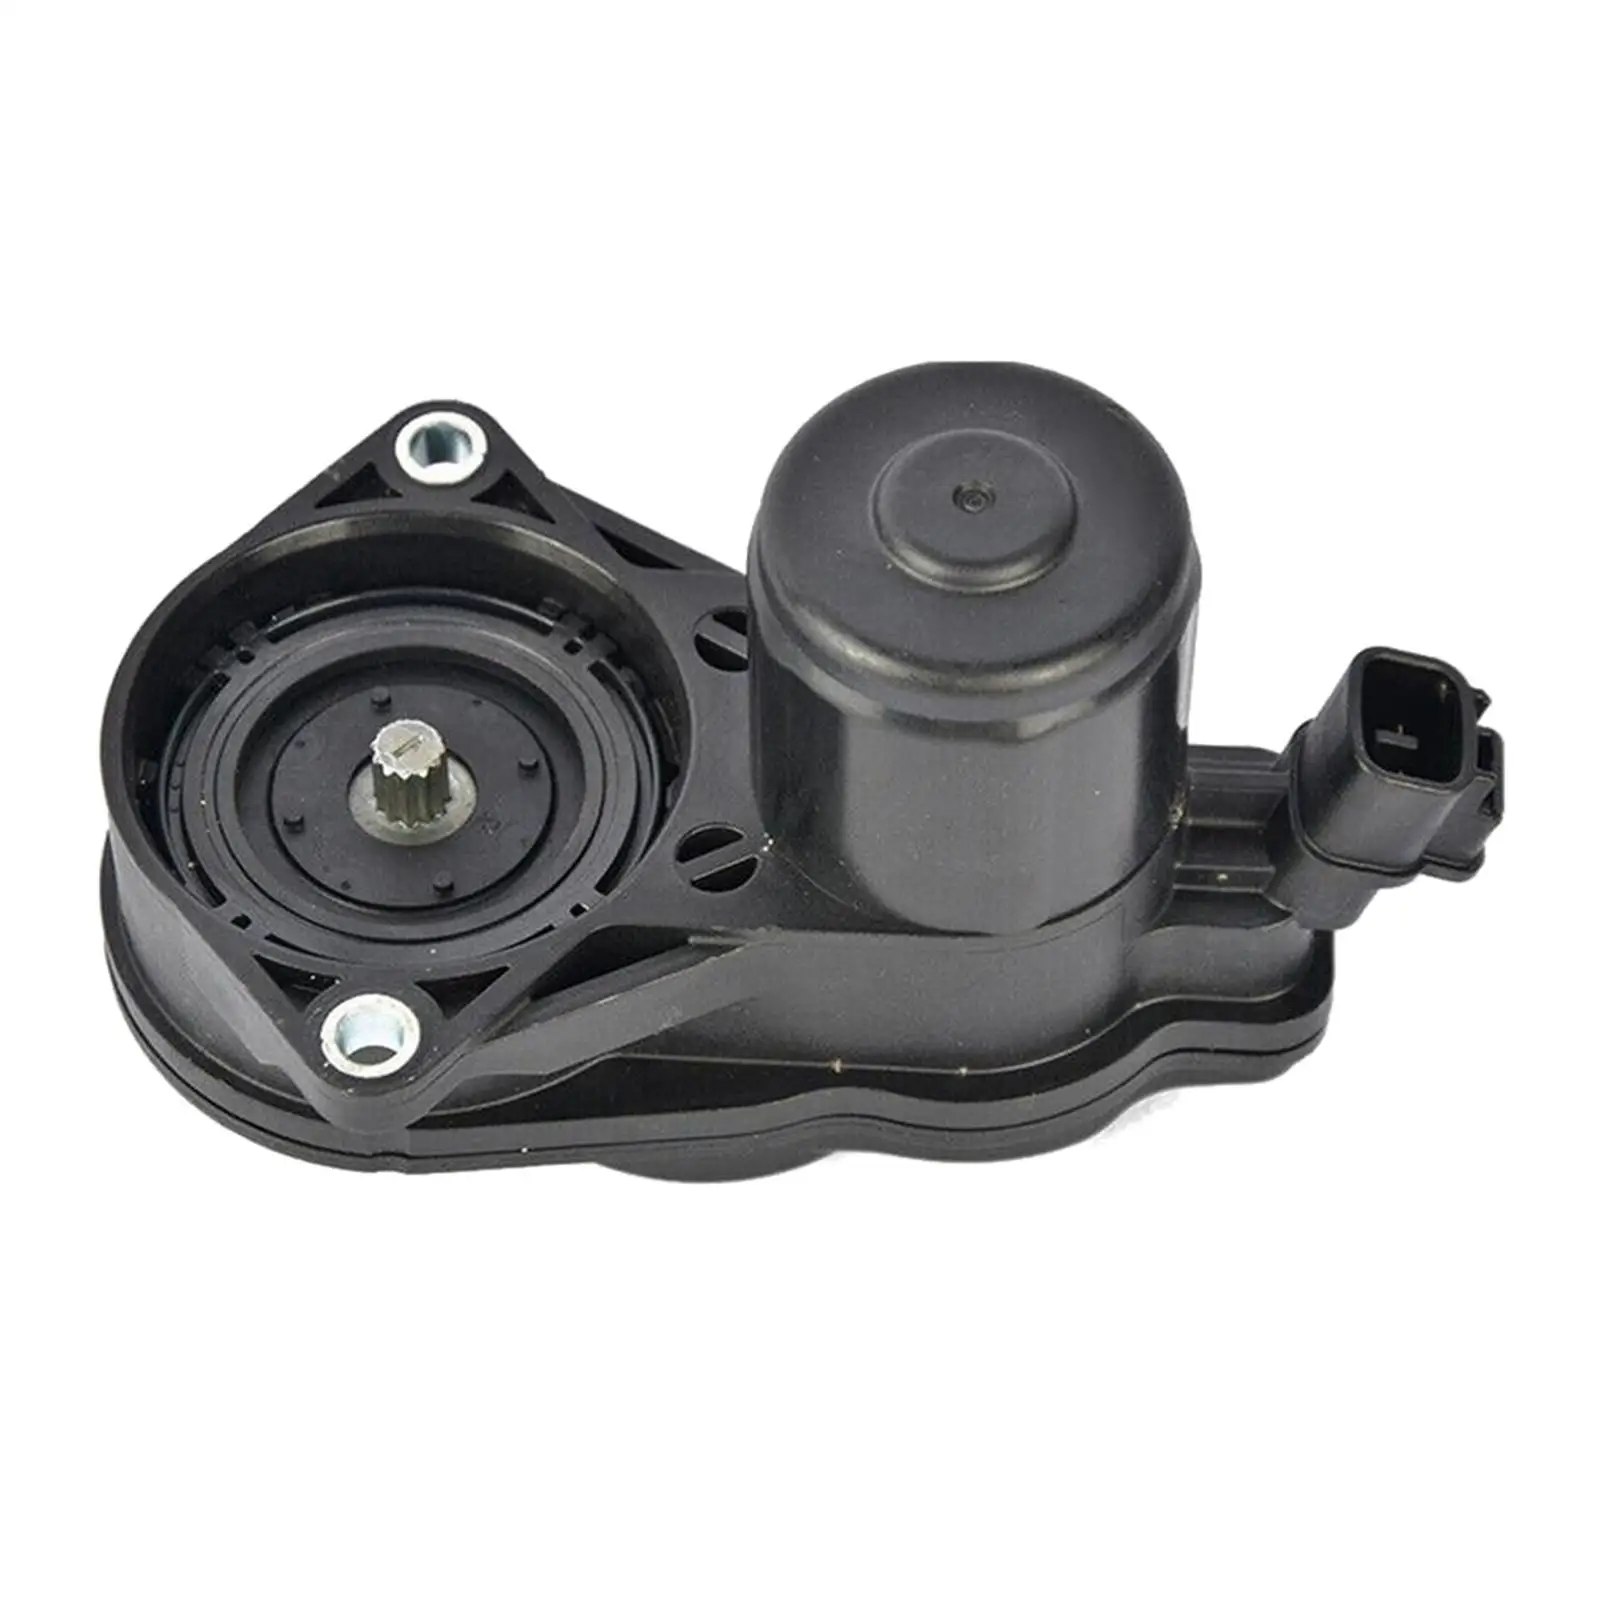 Parking Brake Actuator Assembly Car Accessories Replaces for Toyota for camry Corolla Hatchback for sienna Long Service Life